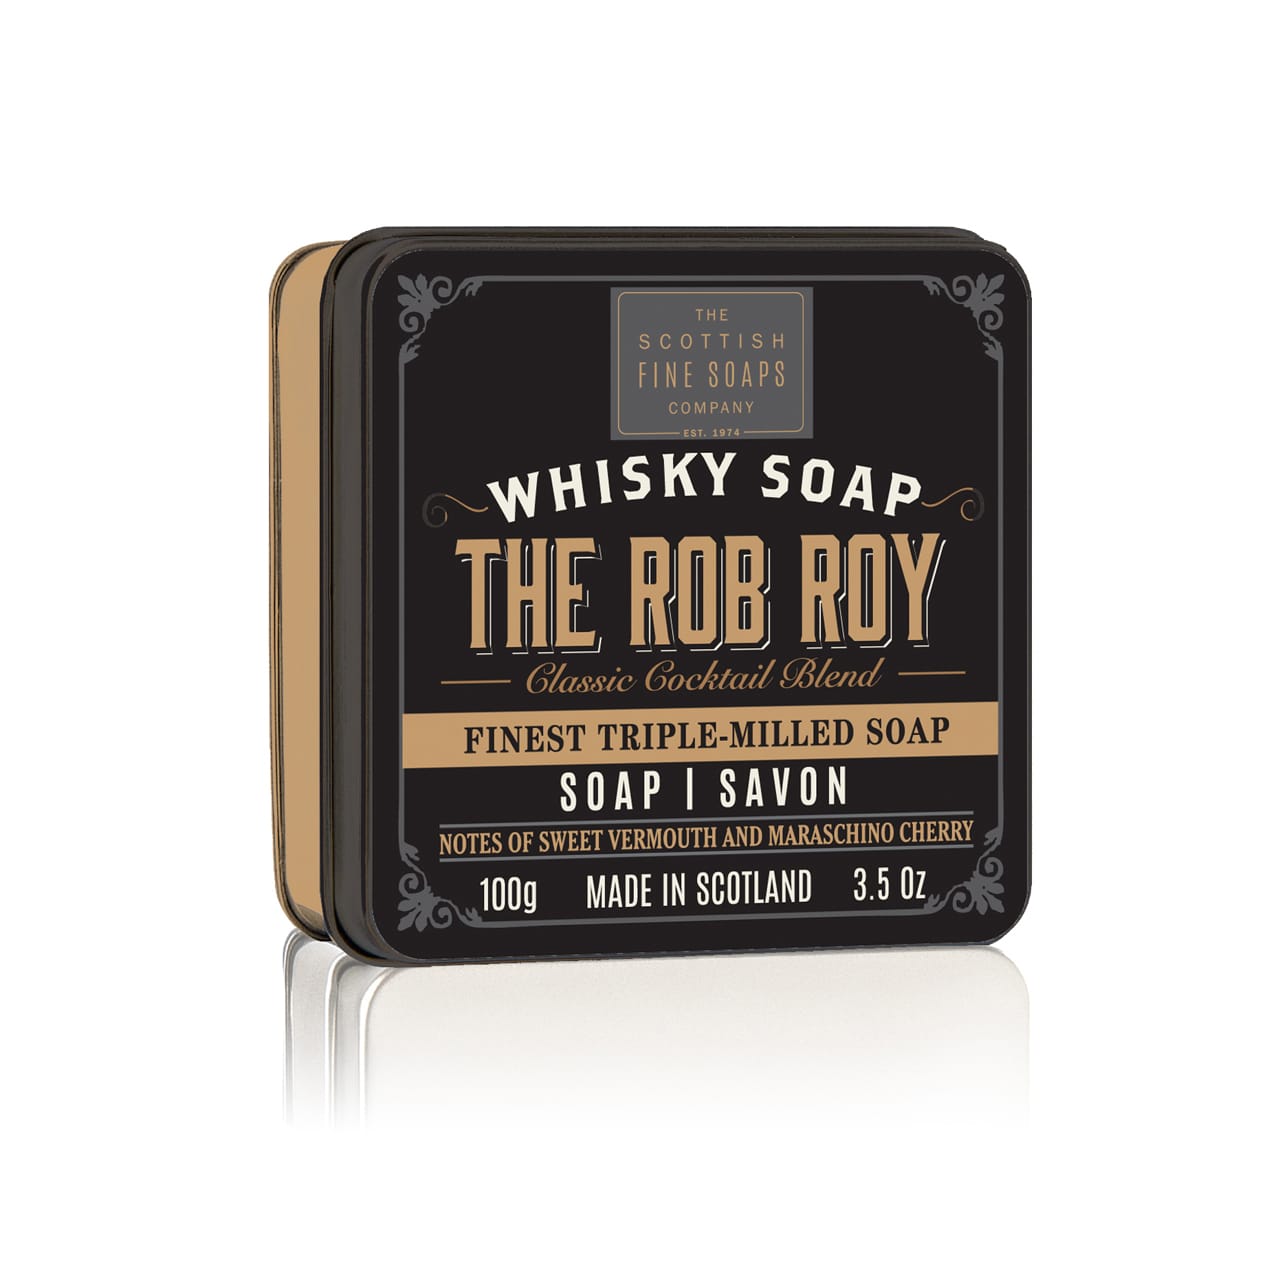 © The Scottish Fine Soaps Company Whisky The Rob Roy Seife in der Dose